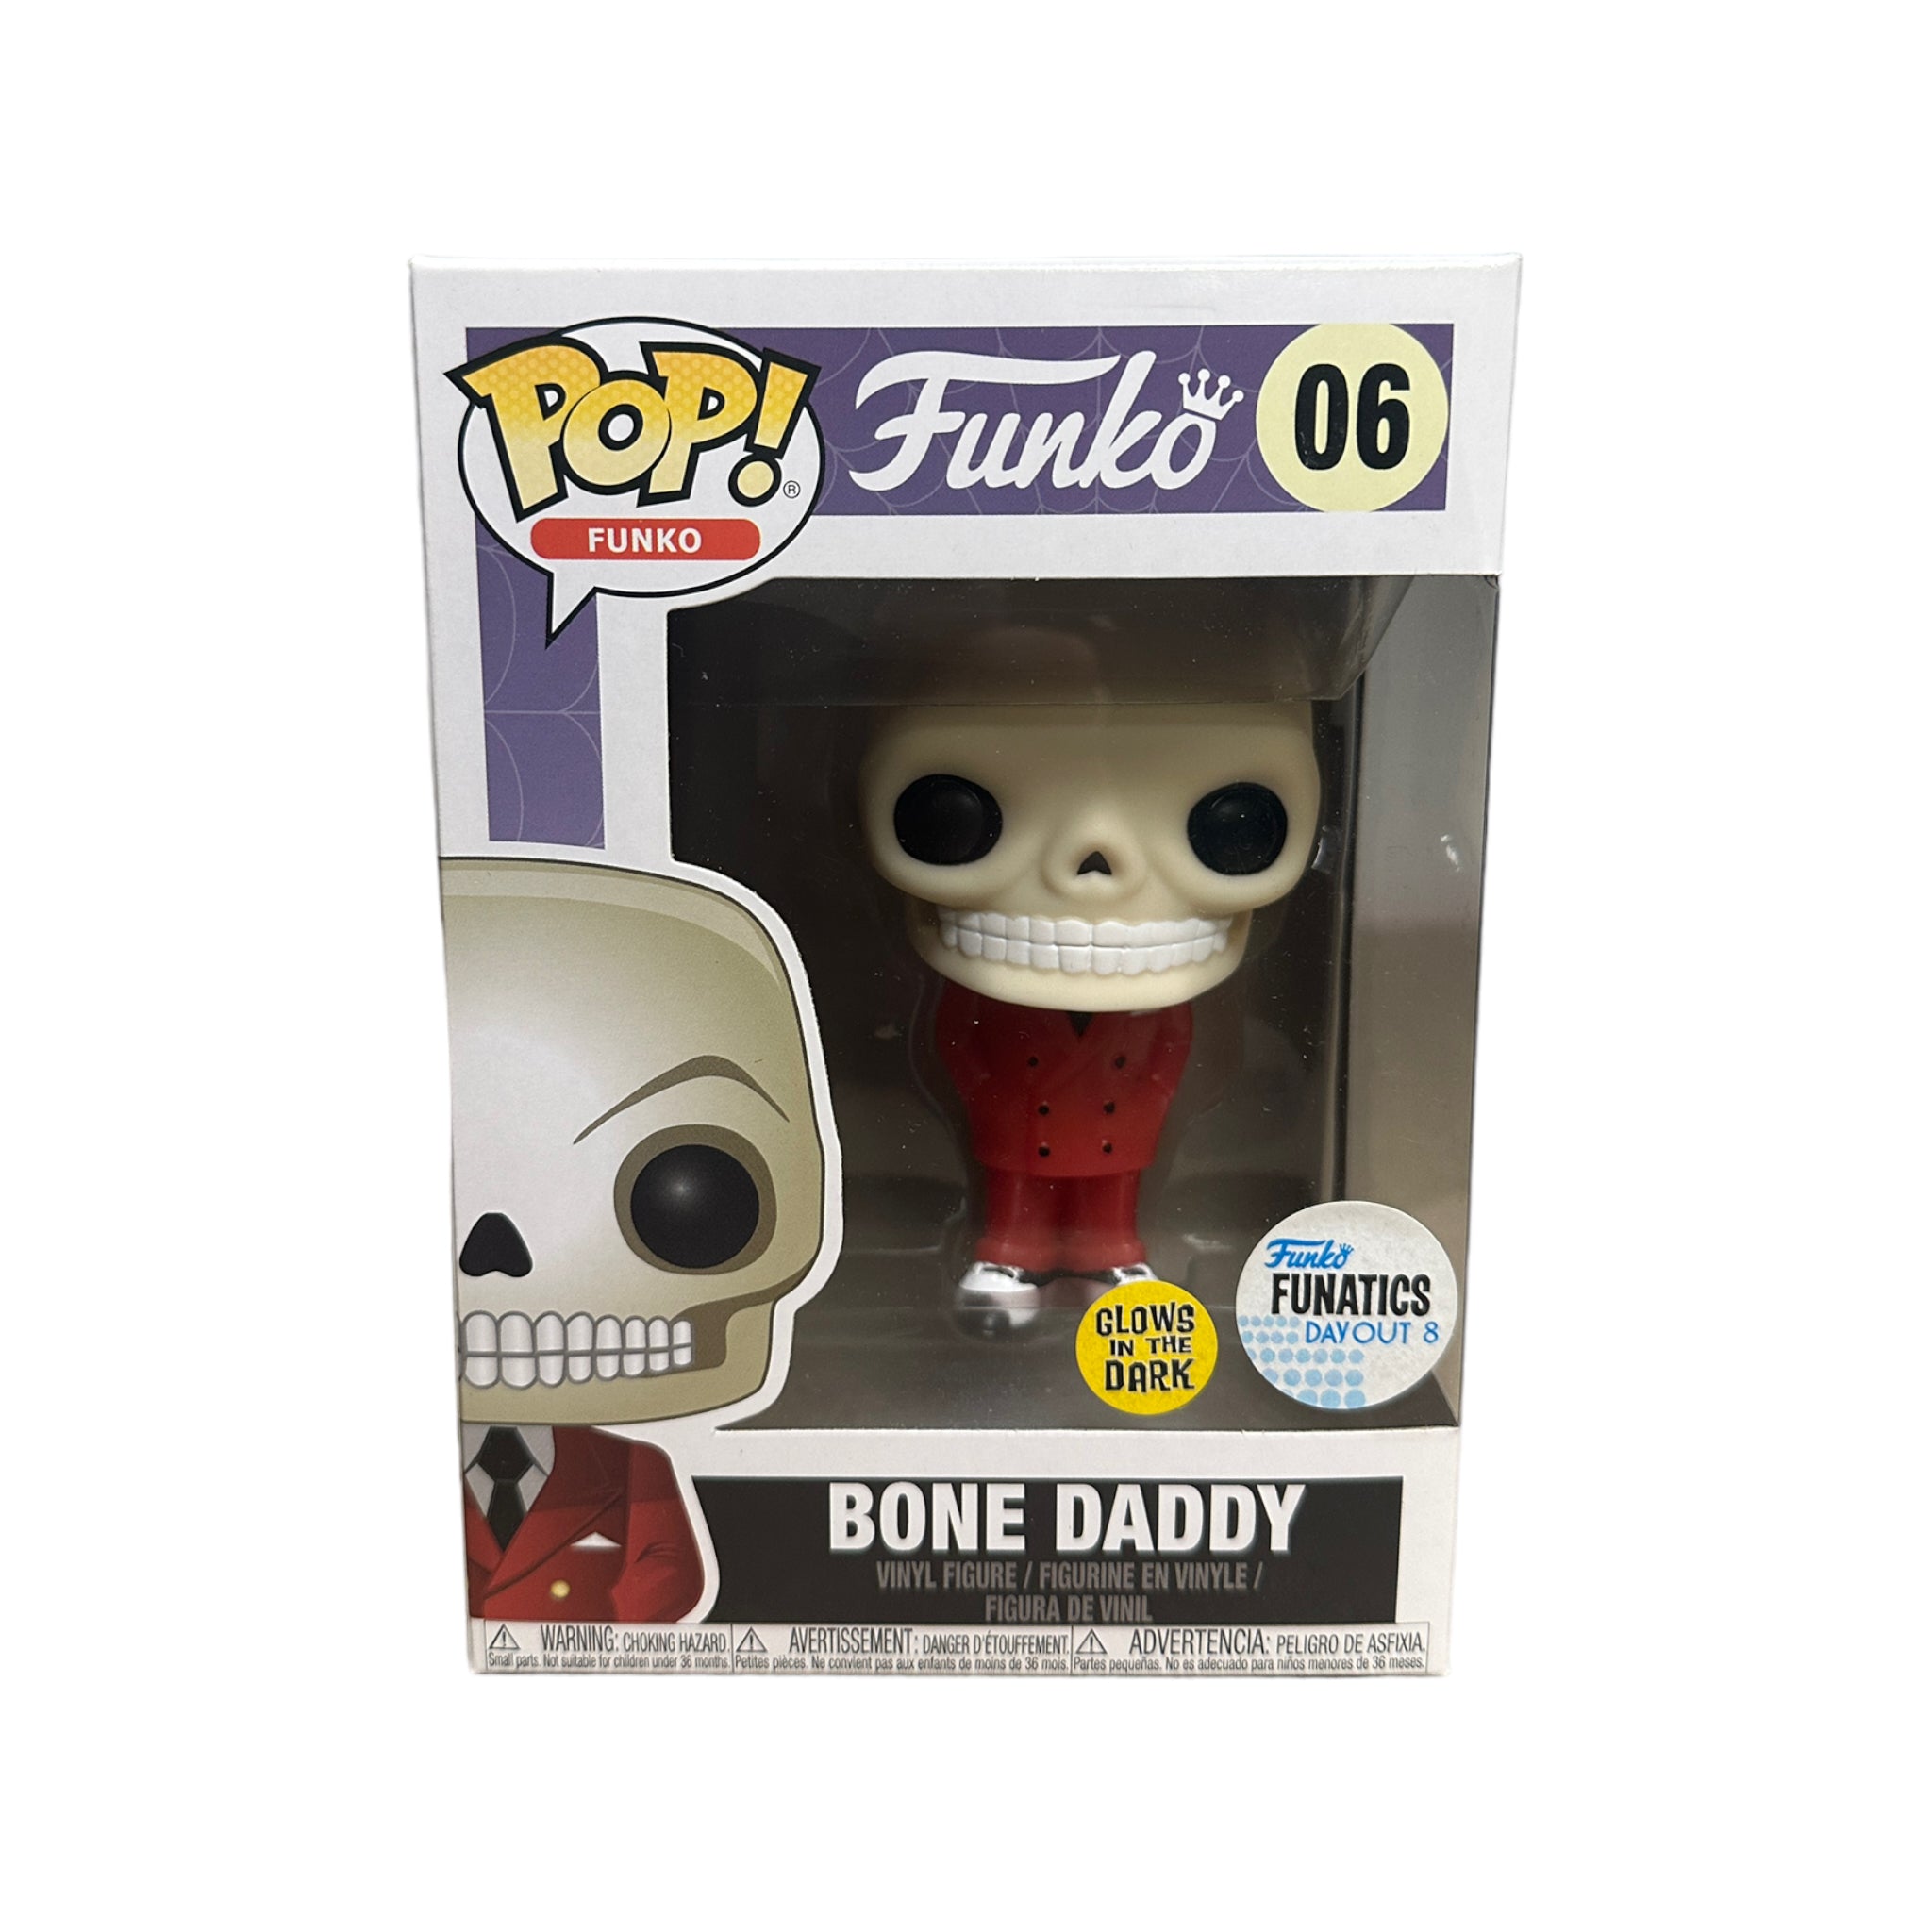 Bone Daddy #06 (Red Suit)(Glows in the Dark) Funko Pop! - Funko Fanatics Day Out 8 Exclusive - Condition 9/10